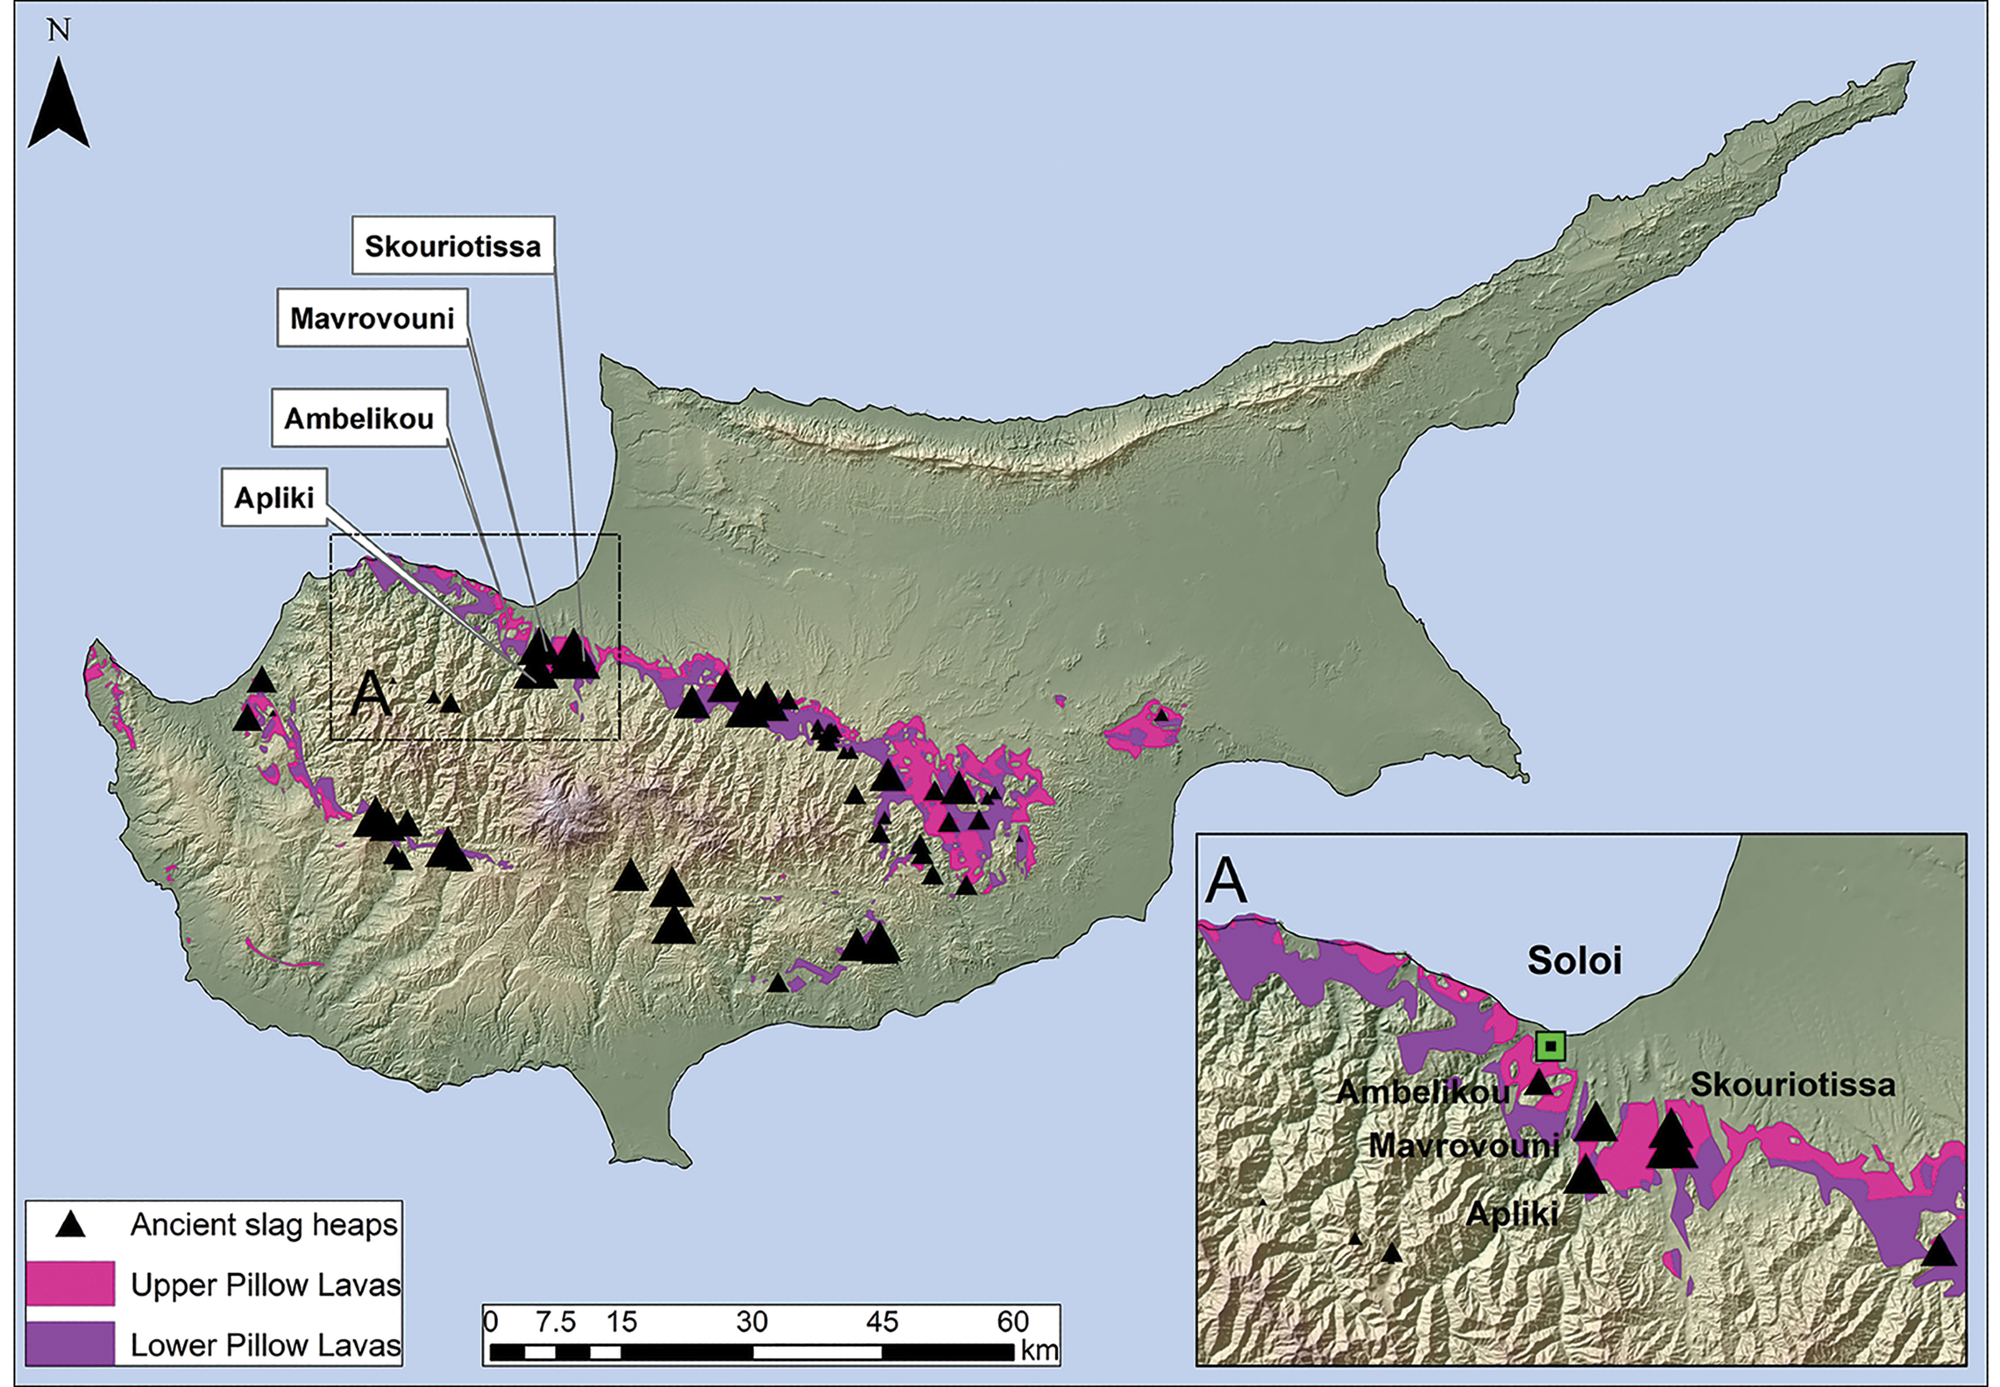 Map of Cyprus showing the Pillow Lava geological formation (where copper ore deposits are found), the location of the ancient slag heaps (triangles indicating size) and, inset, the area of the Solea mines.